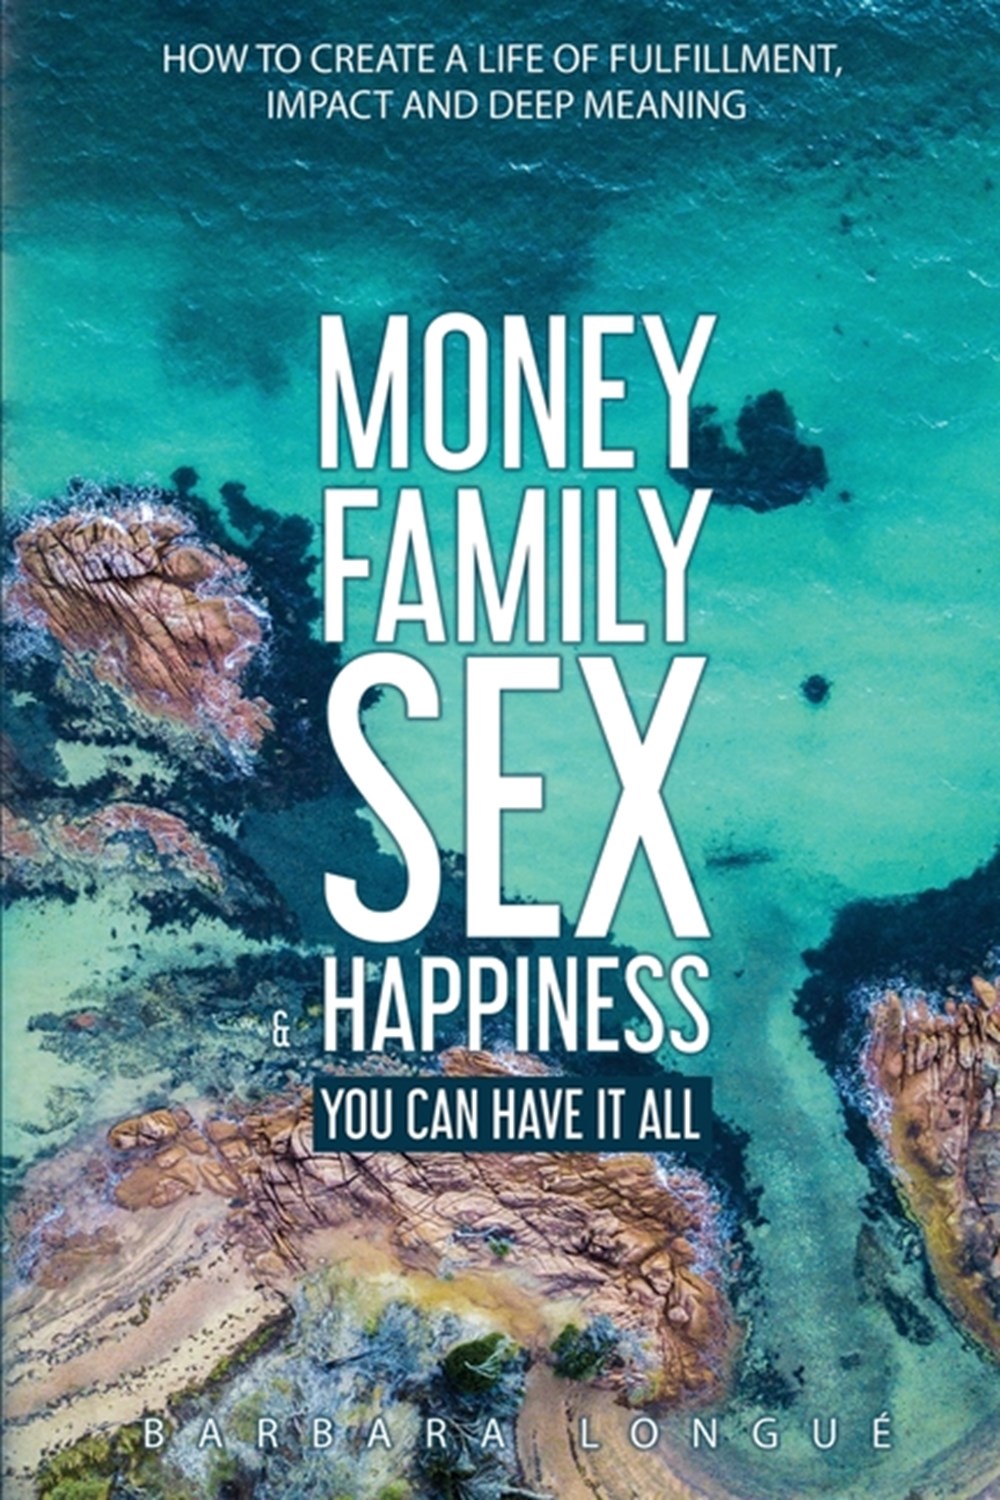 Money Family Sex & Happiness How to Create a Life of Fulfillment, Impact and Deep Meaning